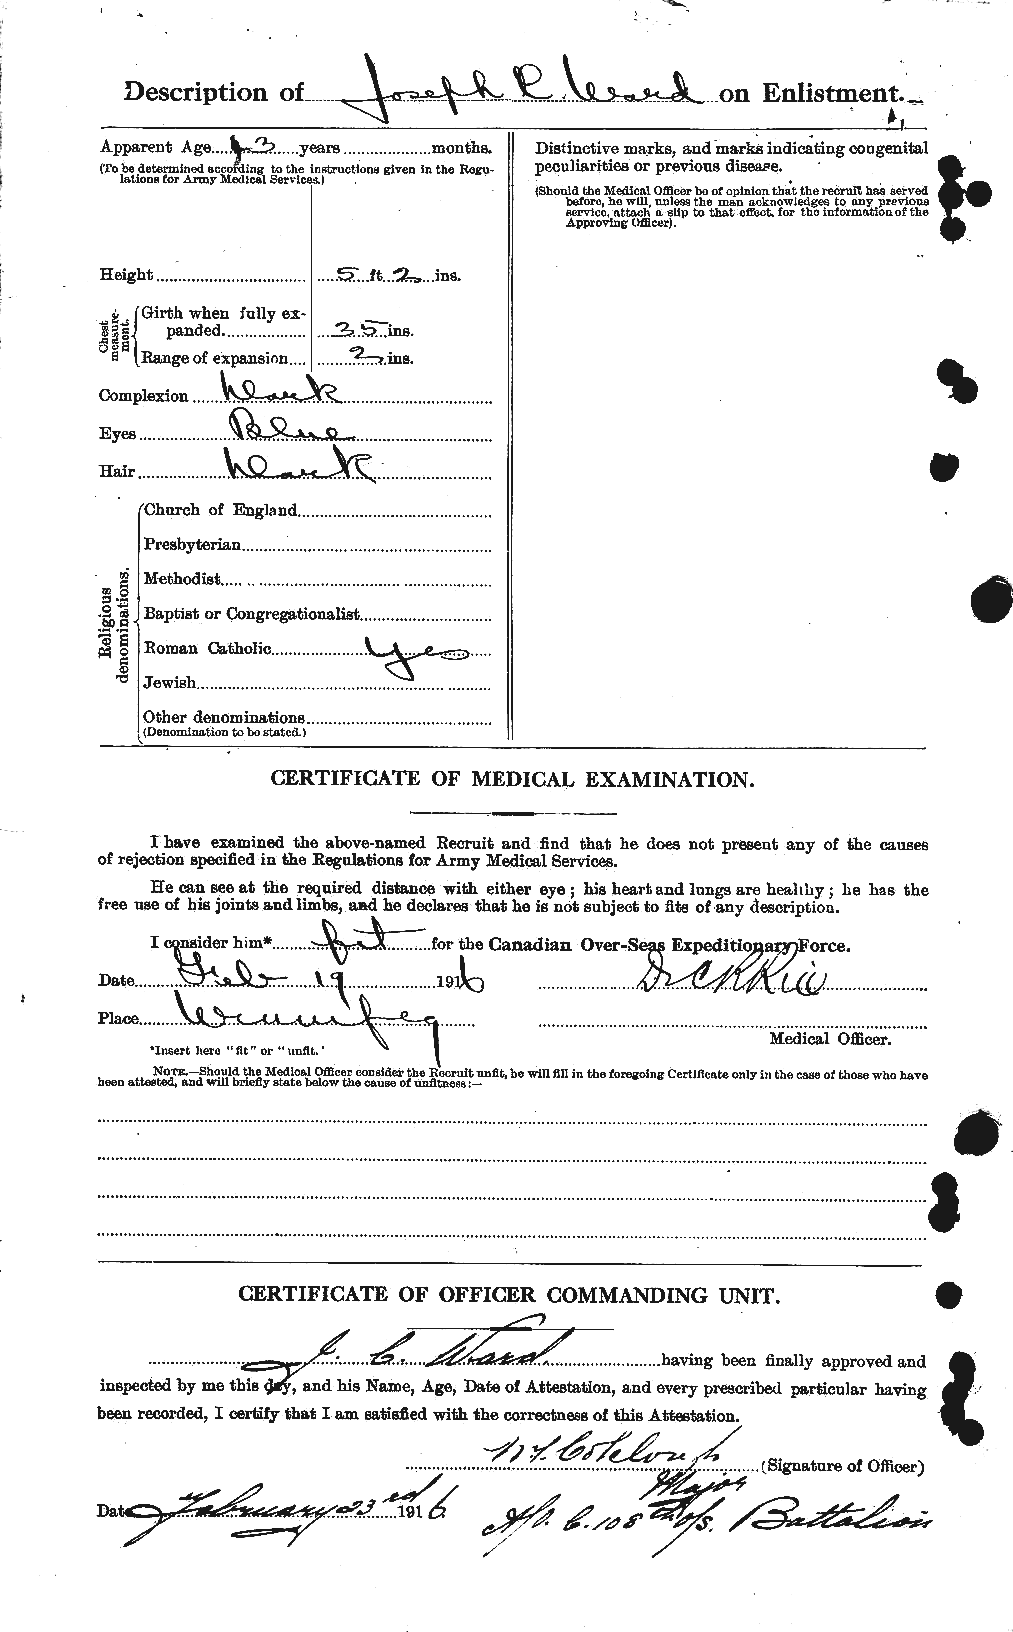 Personnel Records of the First World War - CEF 659561b